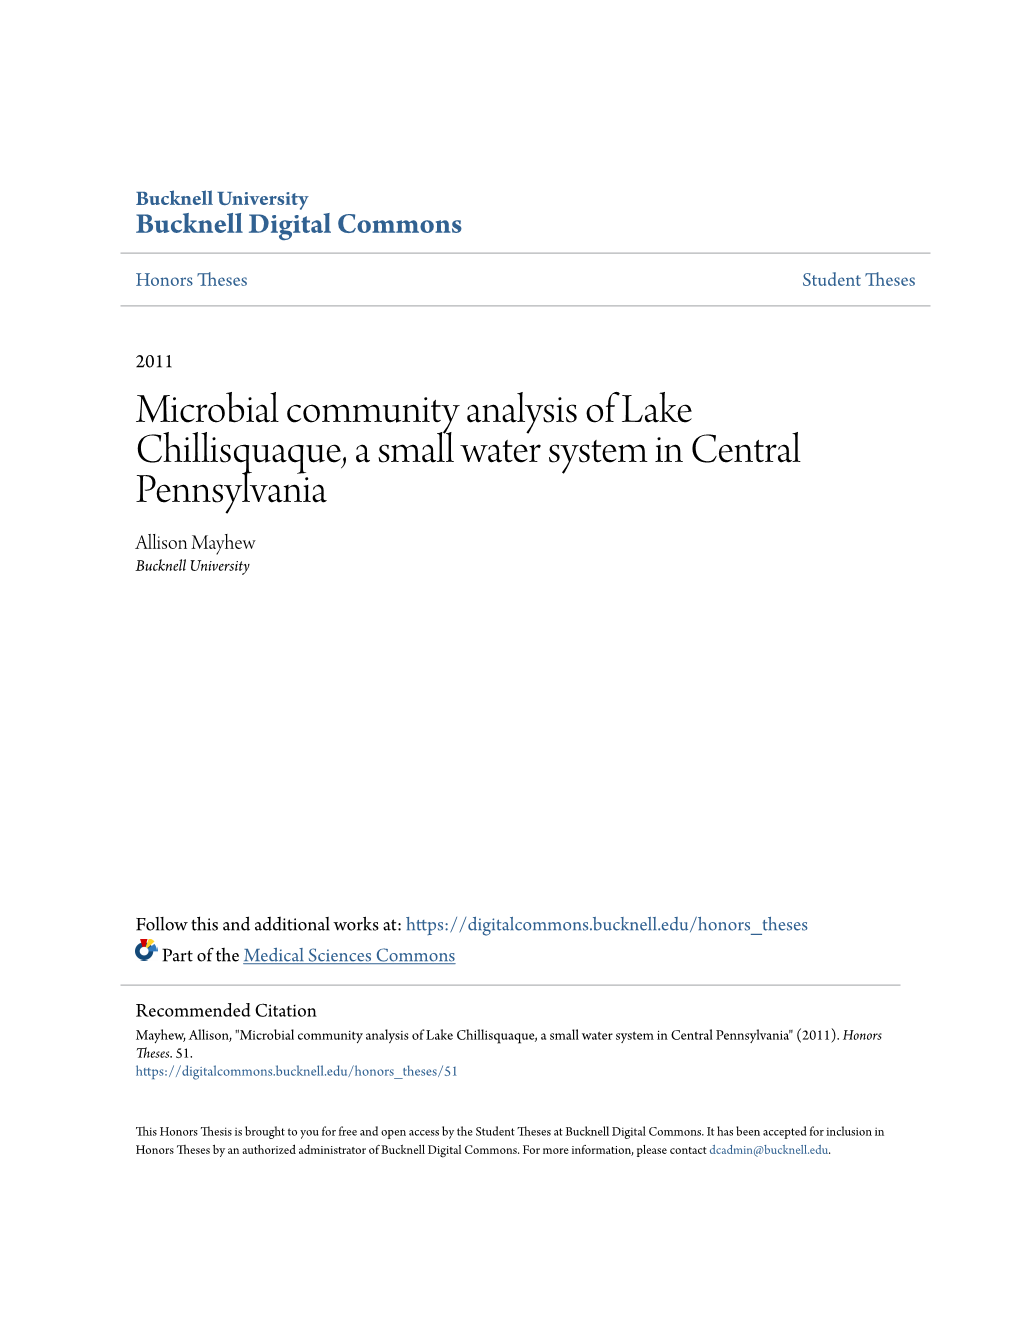 Microbial Community Analysis of Lake Chillisquaque, a Small Water System in Central Pennsylvania Allison Mayhew Bucknell University